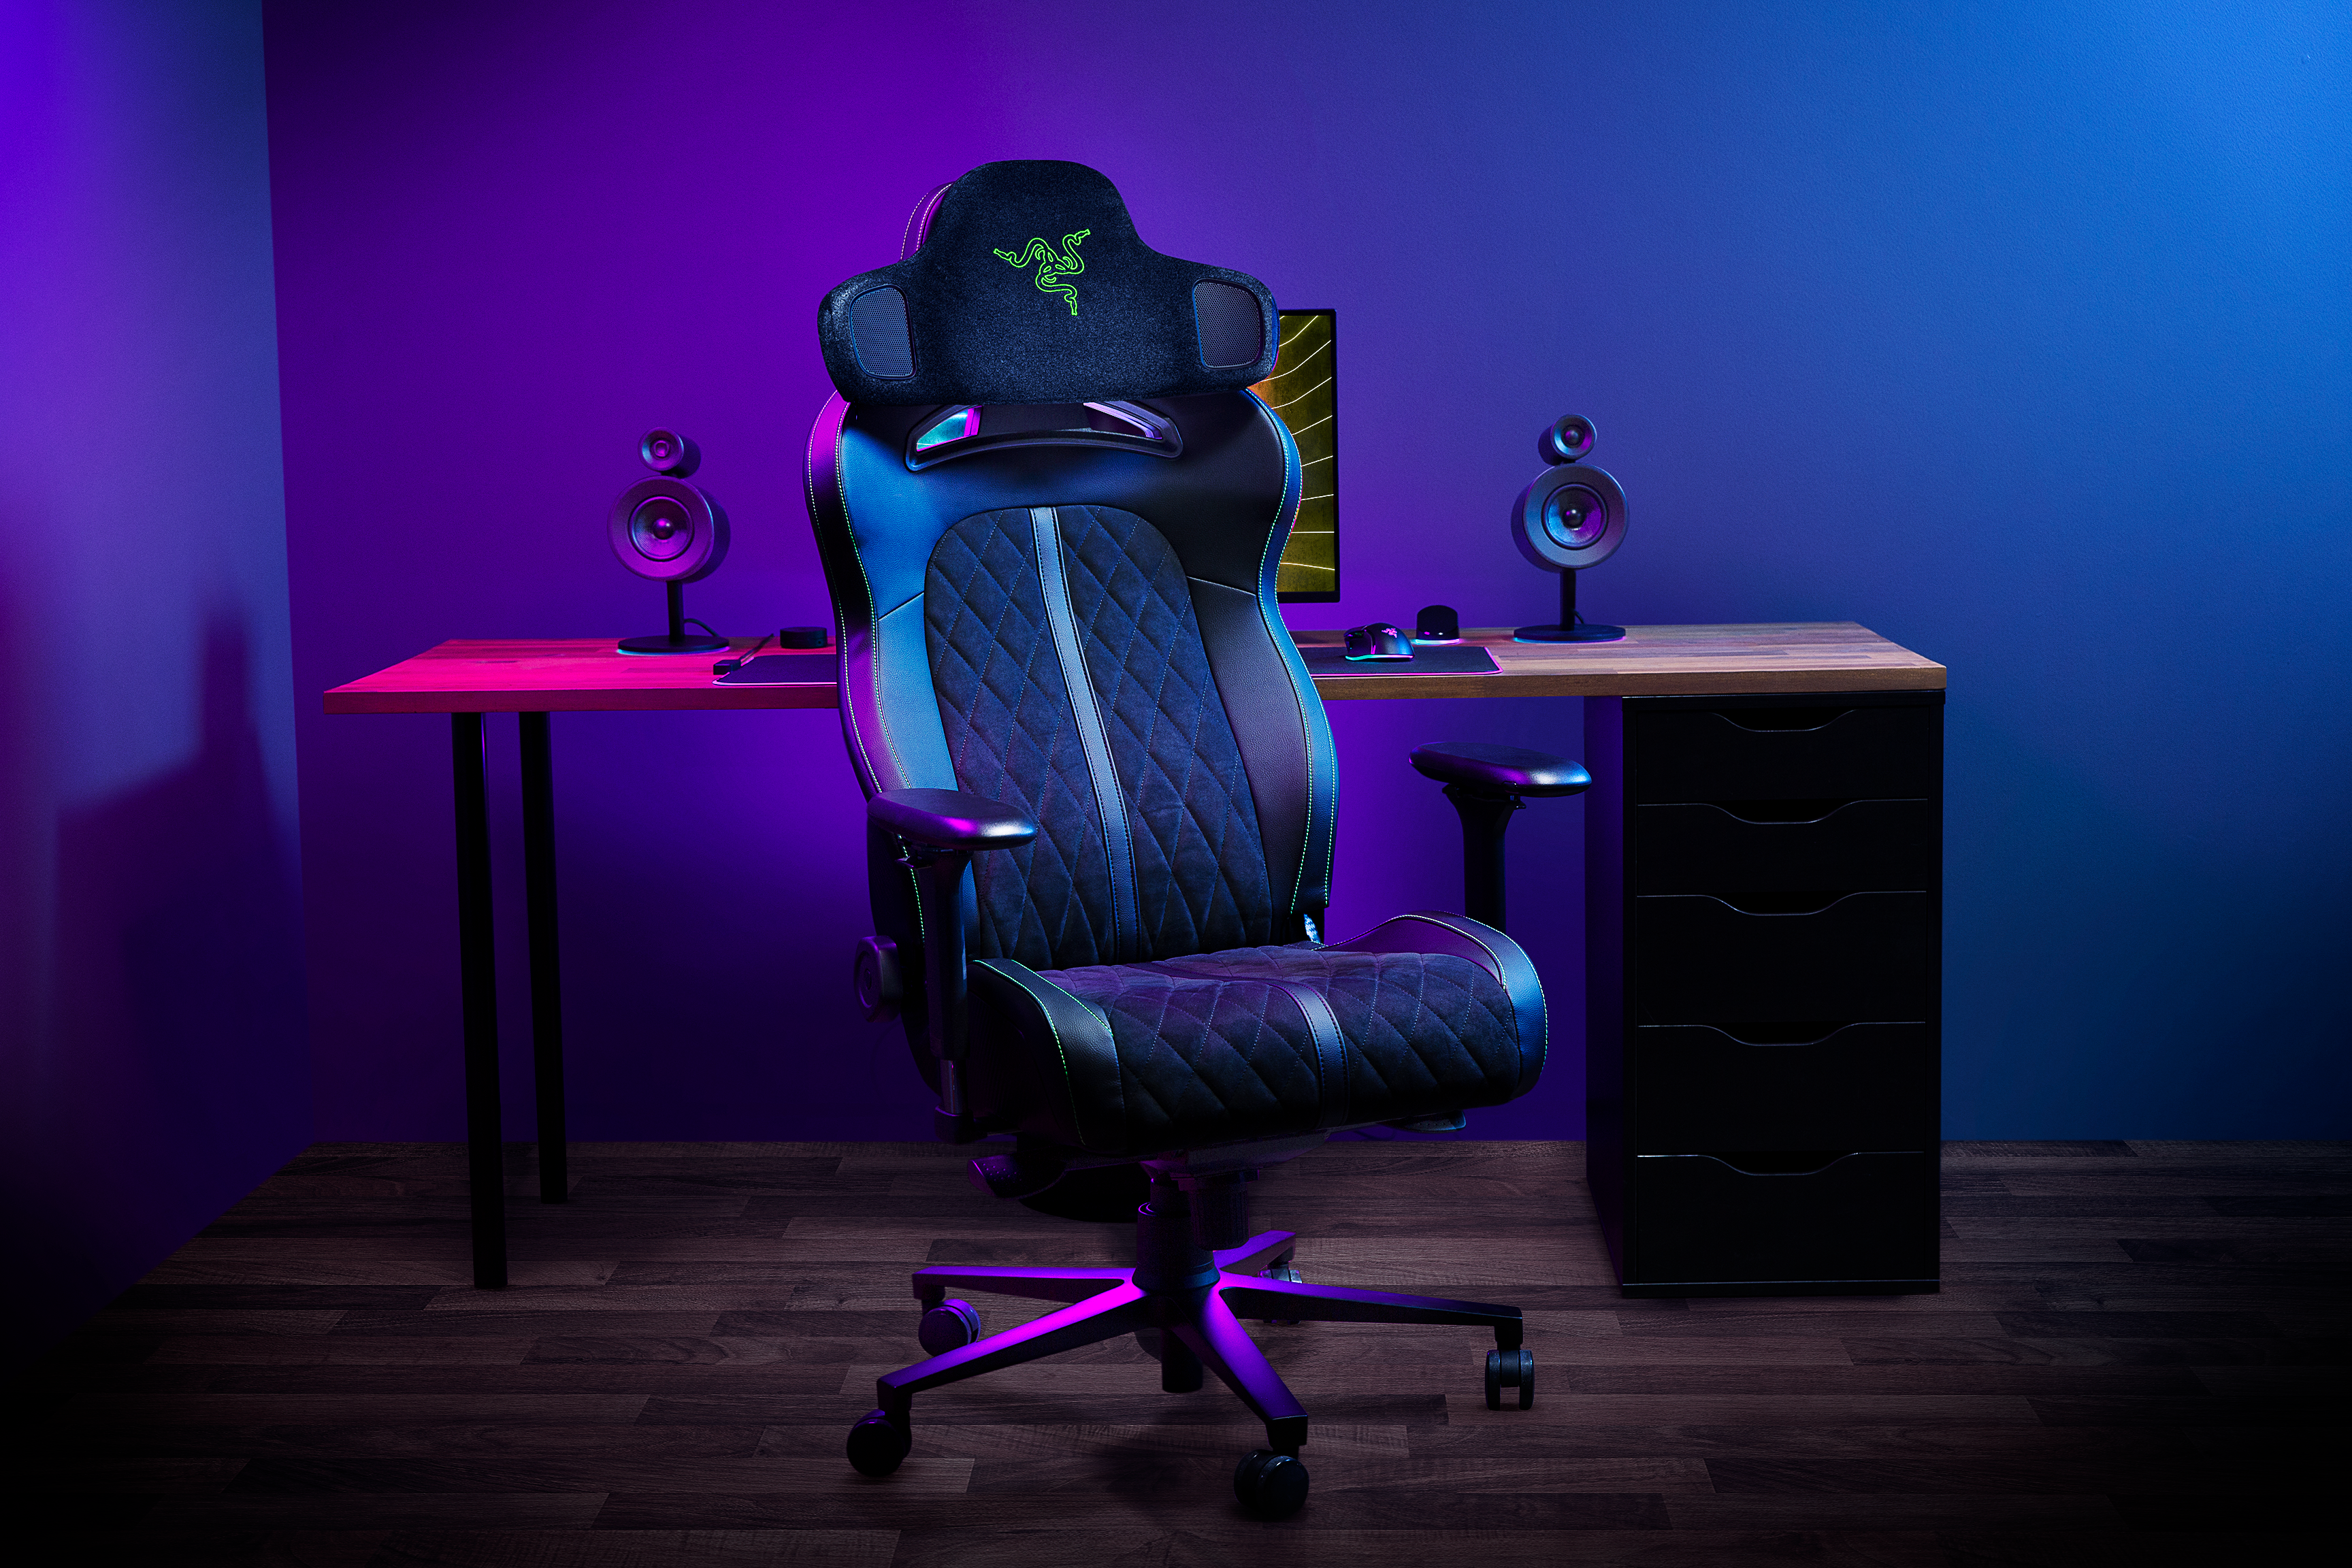 A gaming chair with a Razer-branded headrest mounted on it. The headrest has speakers on both sides.